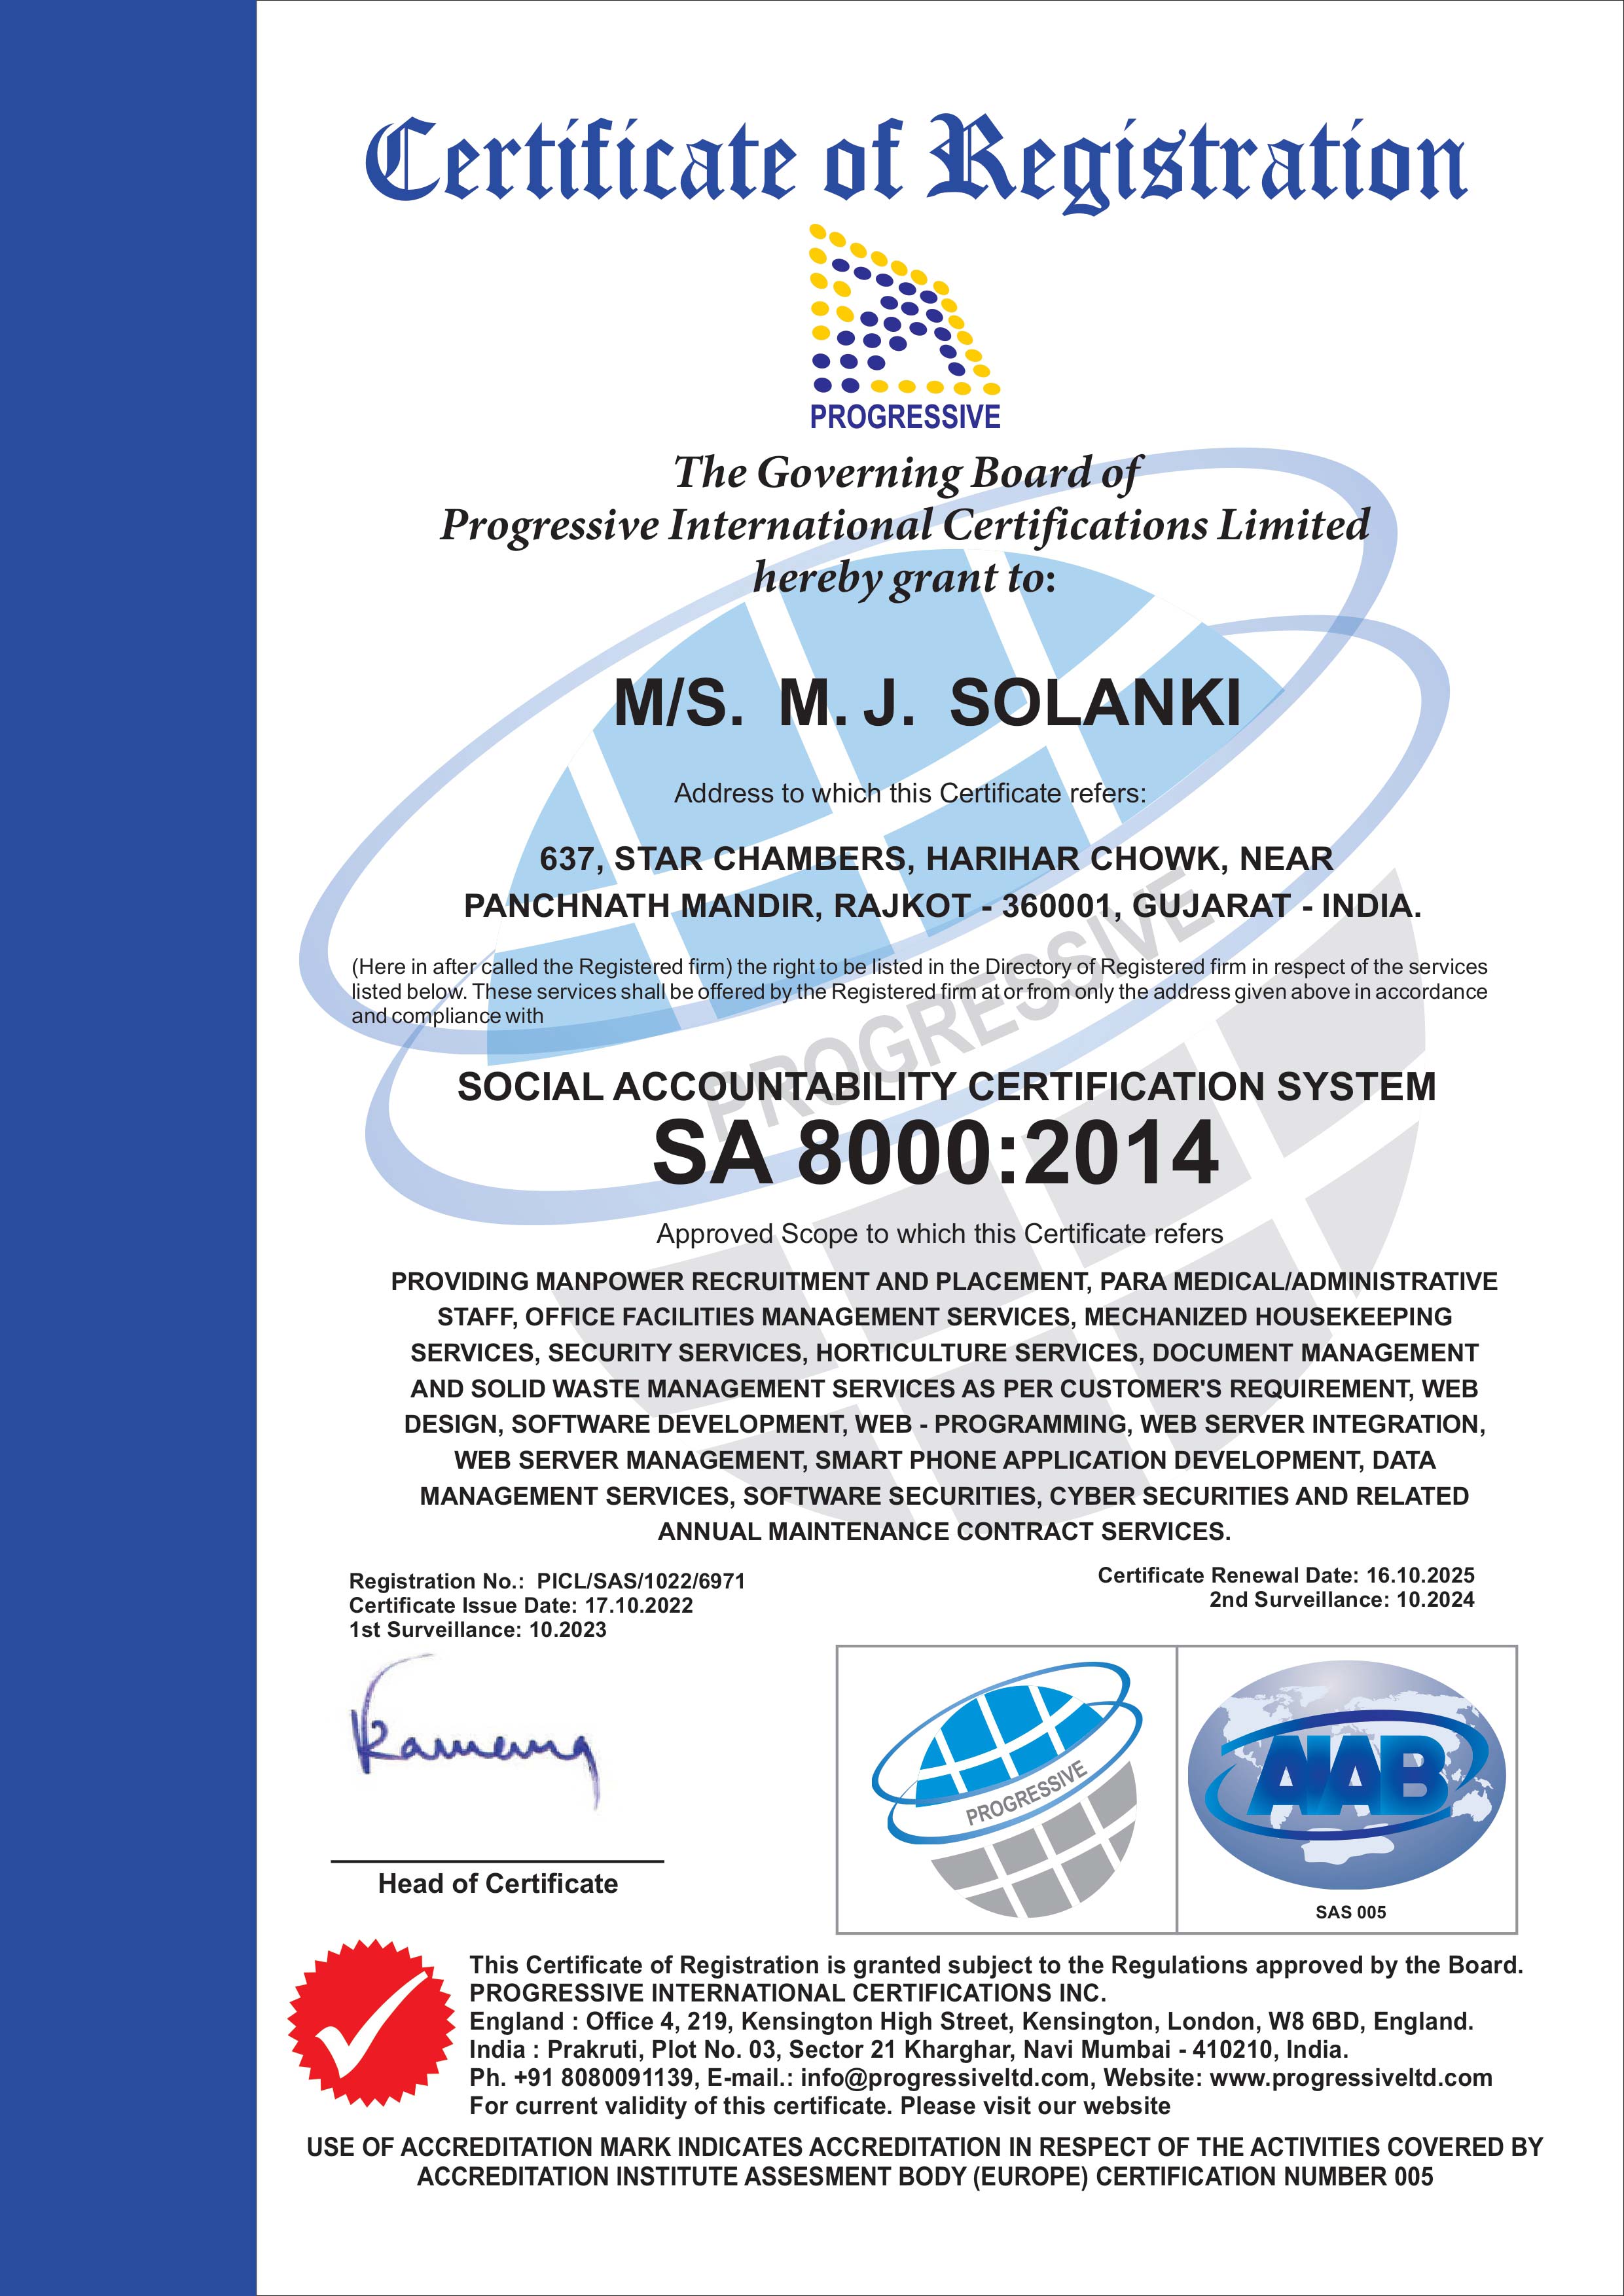 Social Accountability Certification System Certificate Image